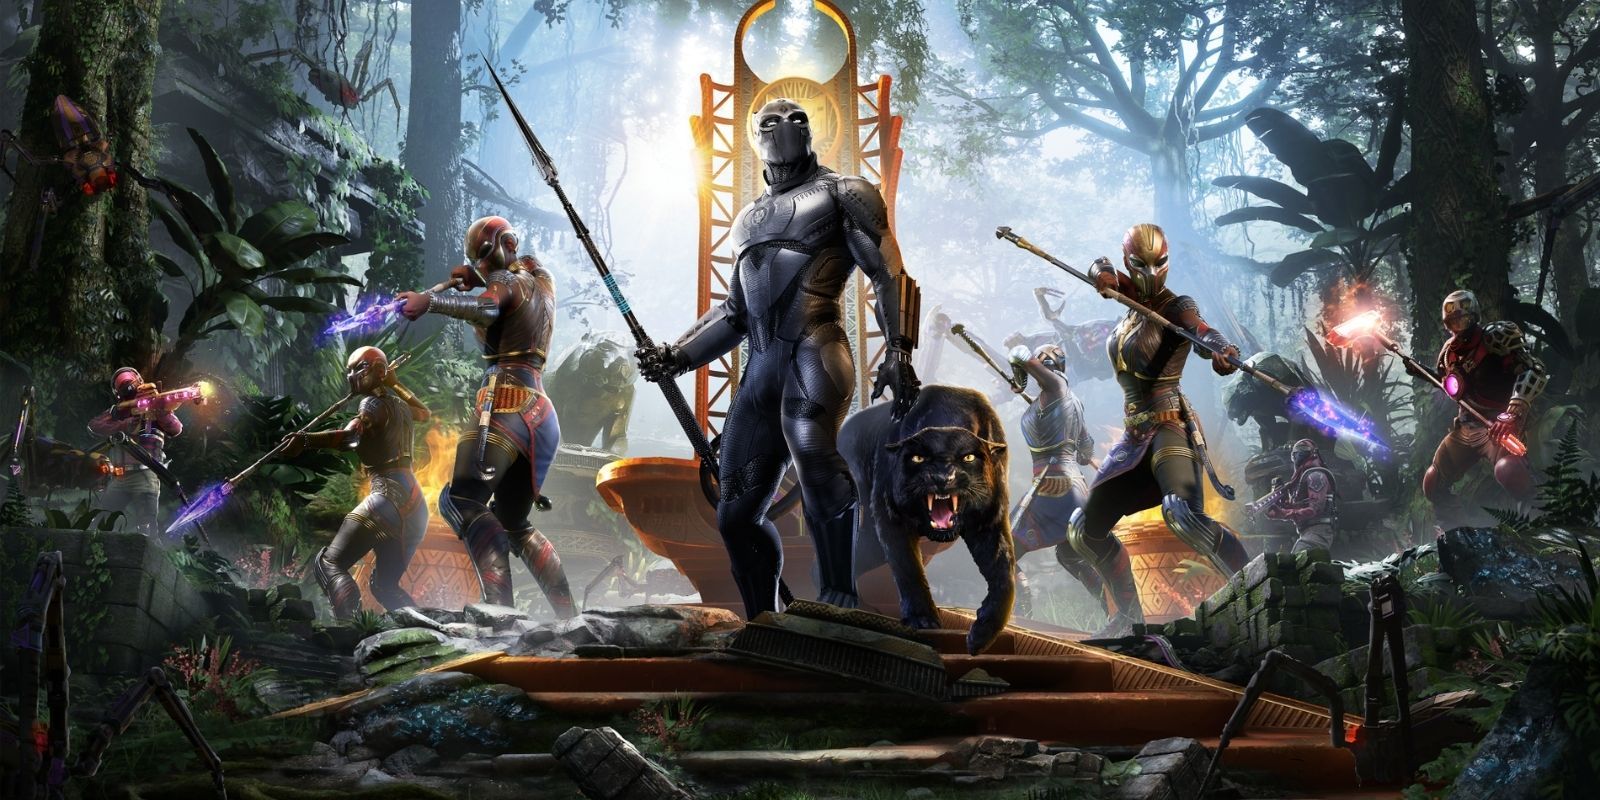 Black Panther surrounded by Wakandan warriors in War for Wakanda